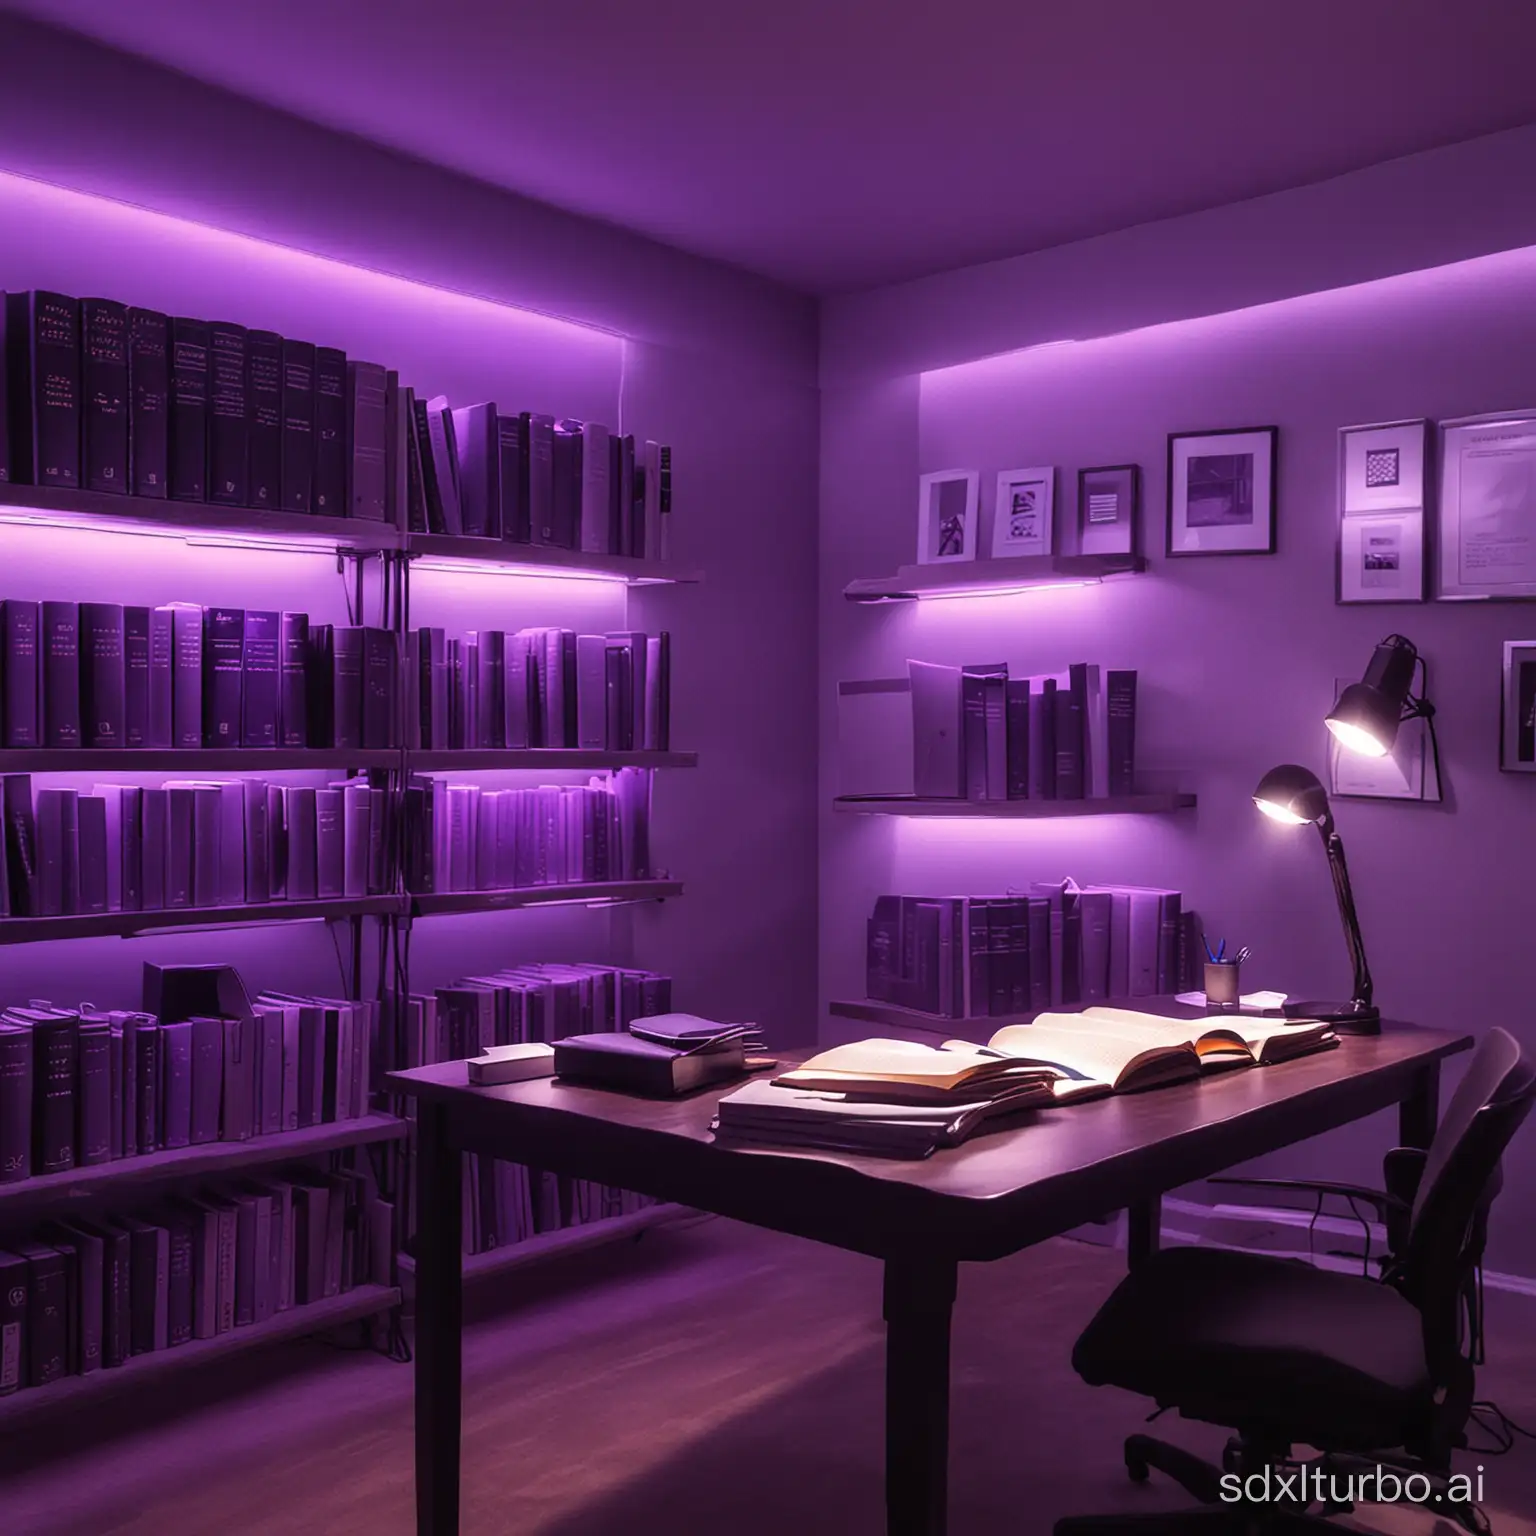 create an office backgroud with books and cool purple lighting